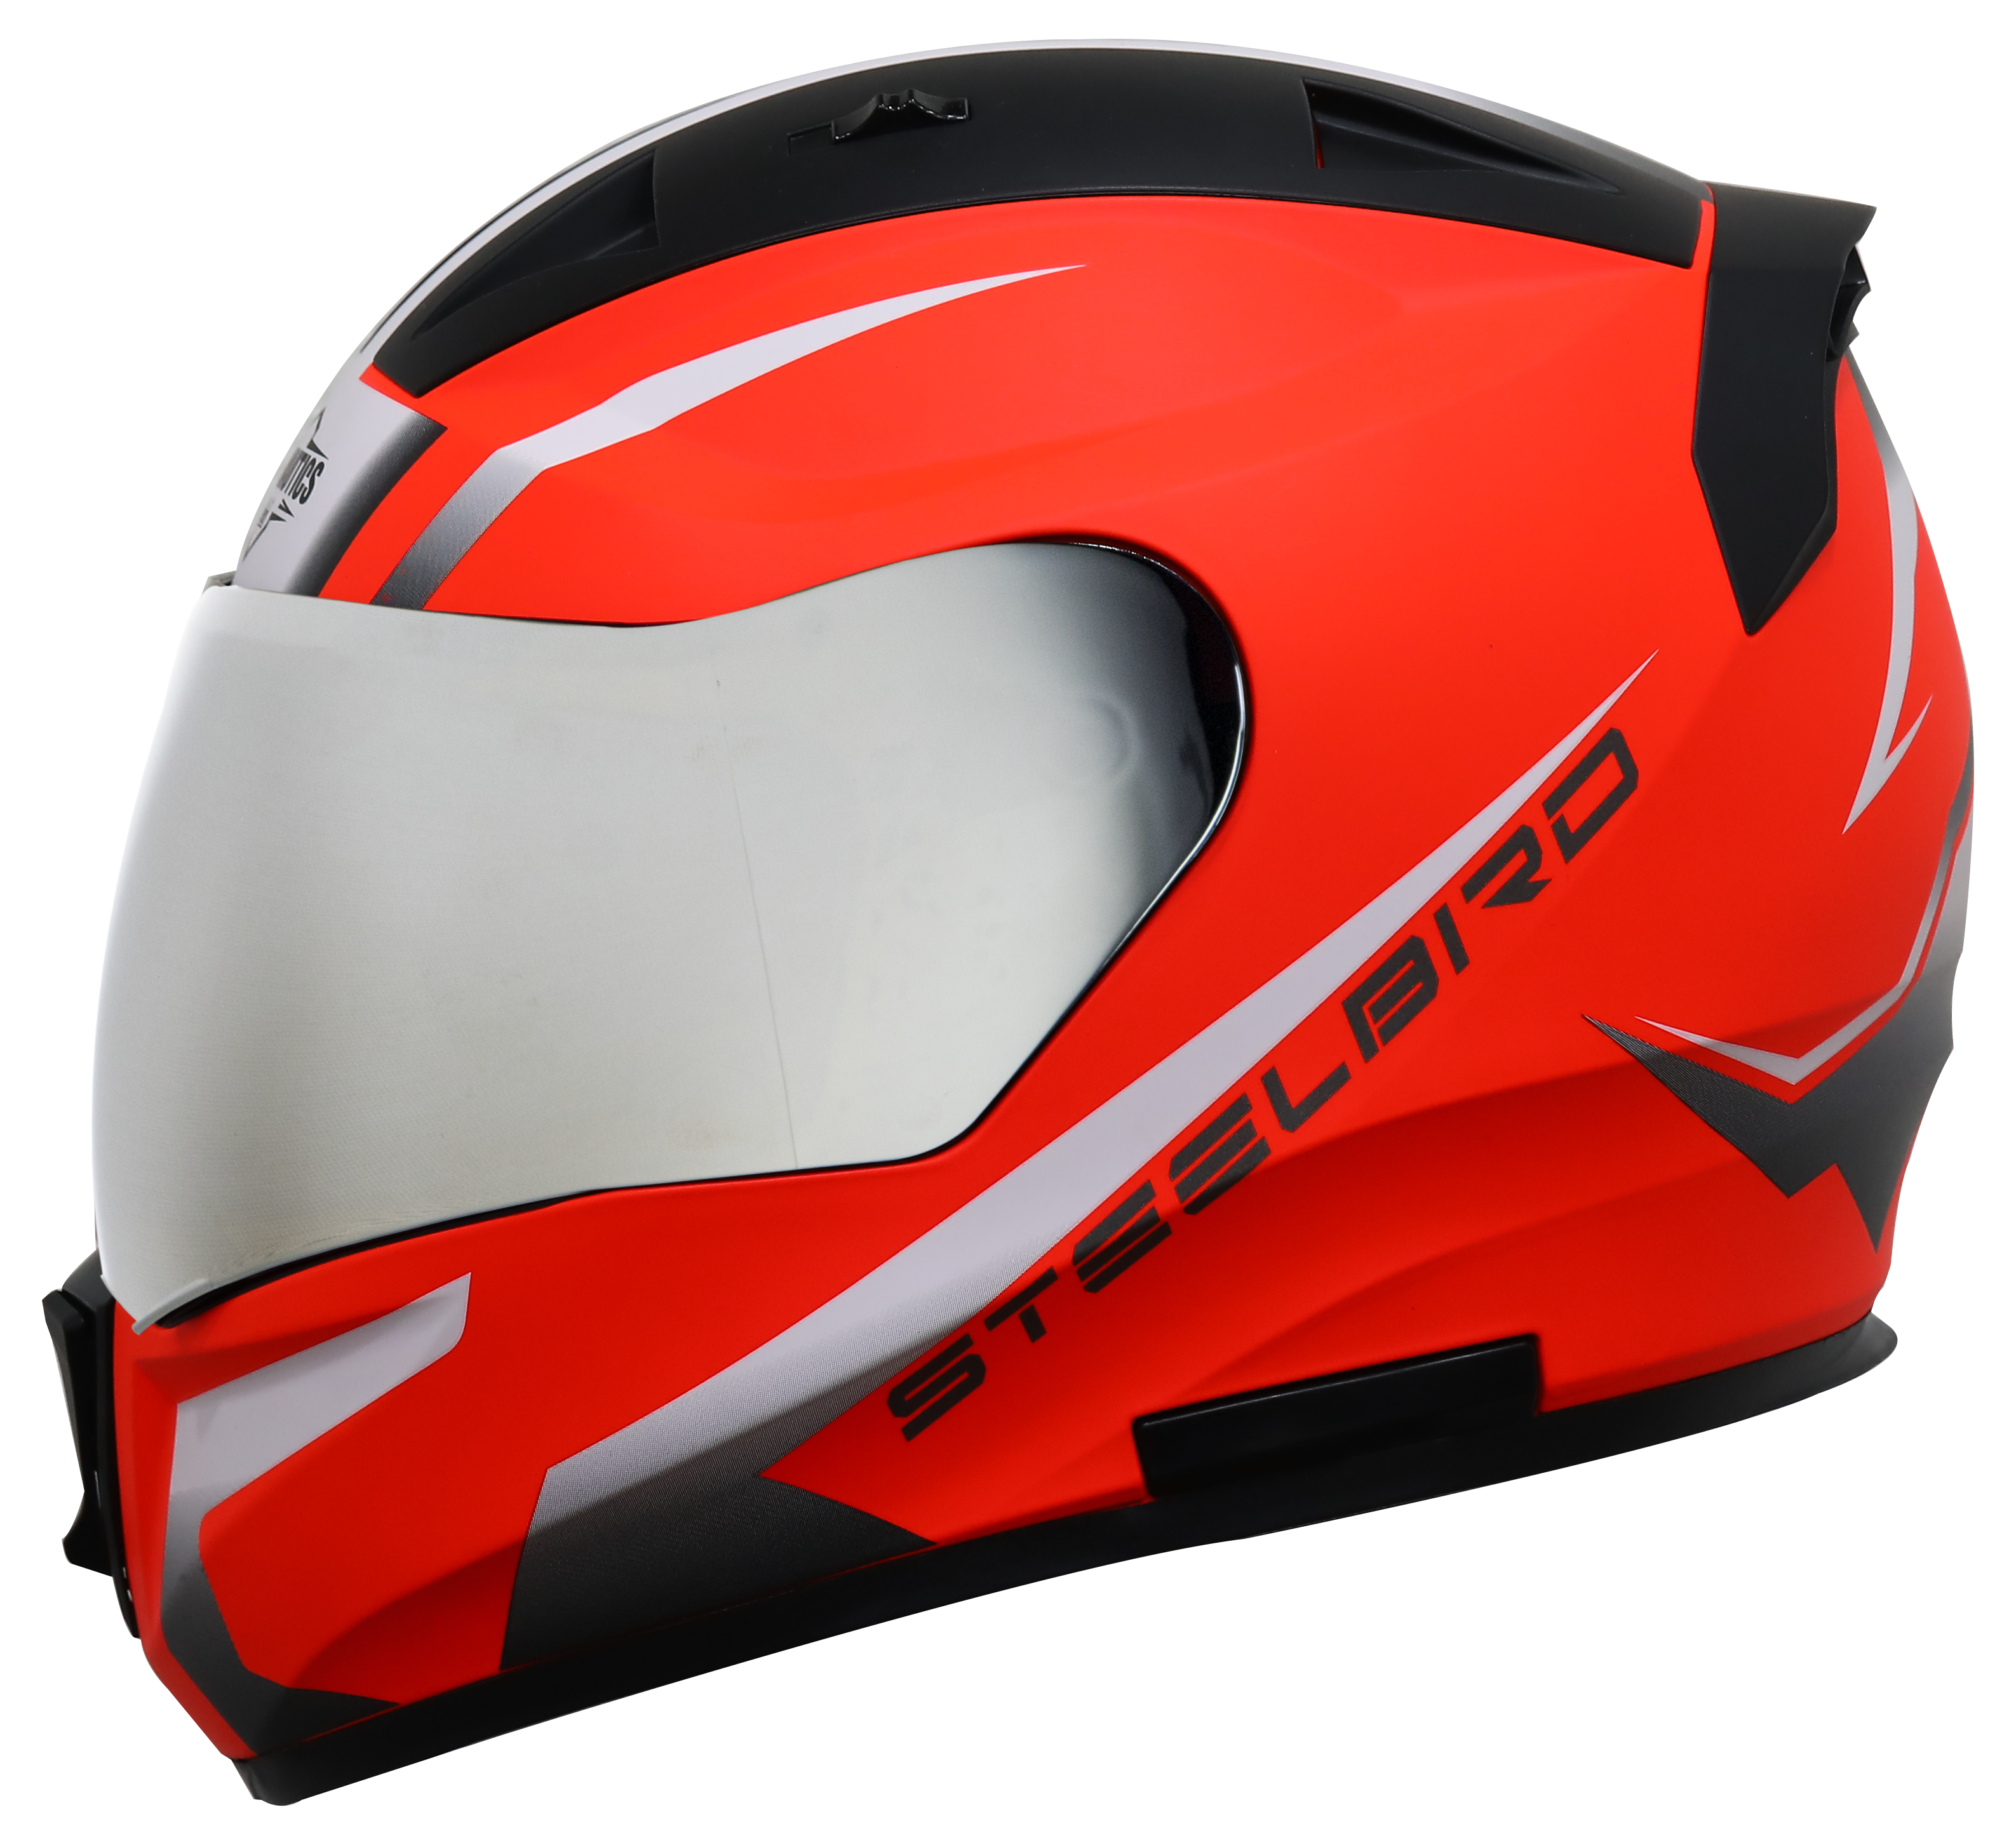 SA-1 WHIF GLOSSY FLUO RED WITH WHITE CHROME SILVER VISOR (WITH EXTRA FREE CLEAR VISOR)